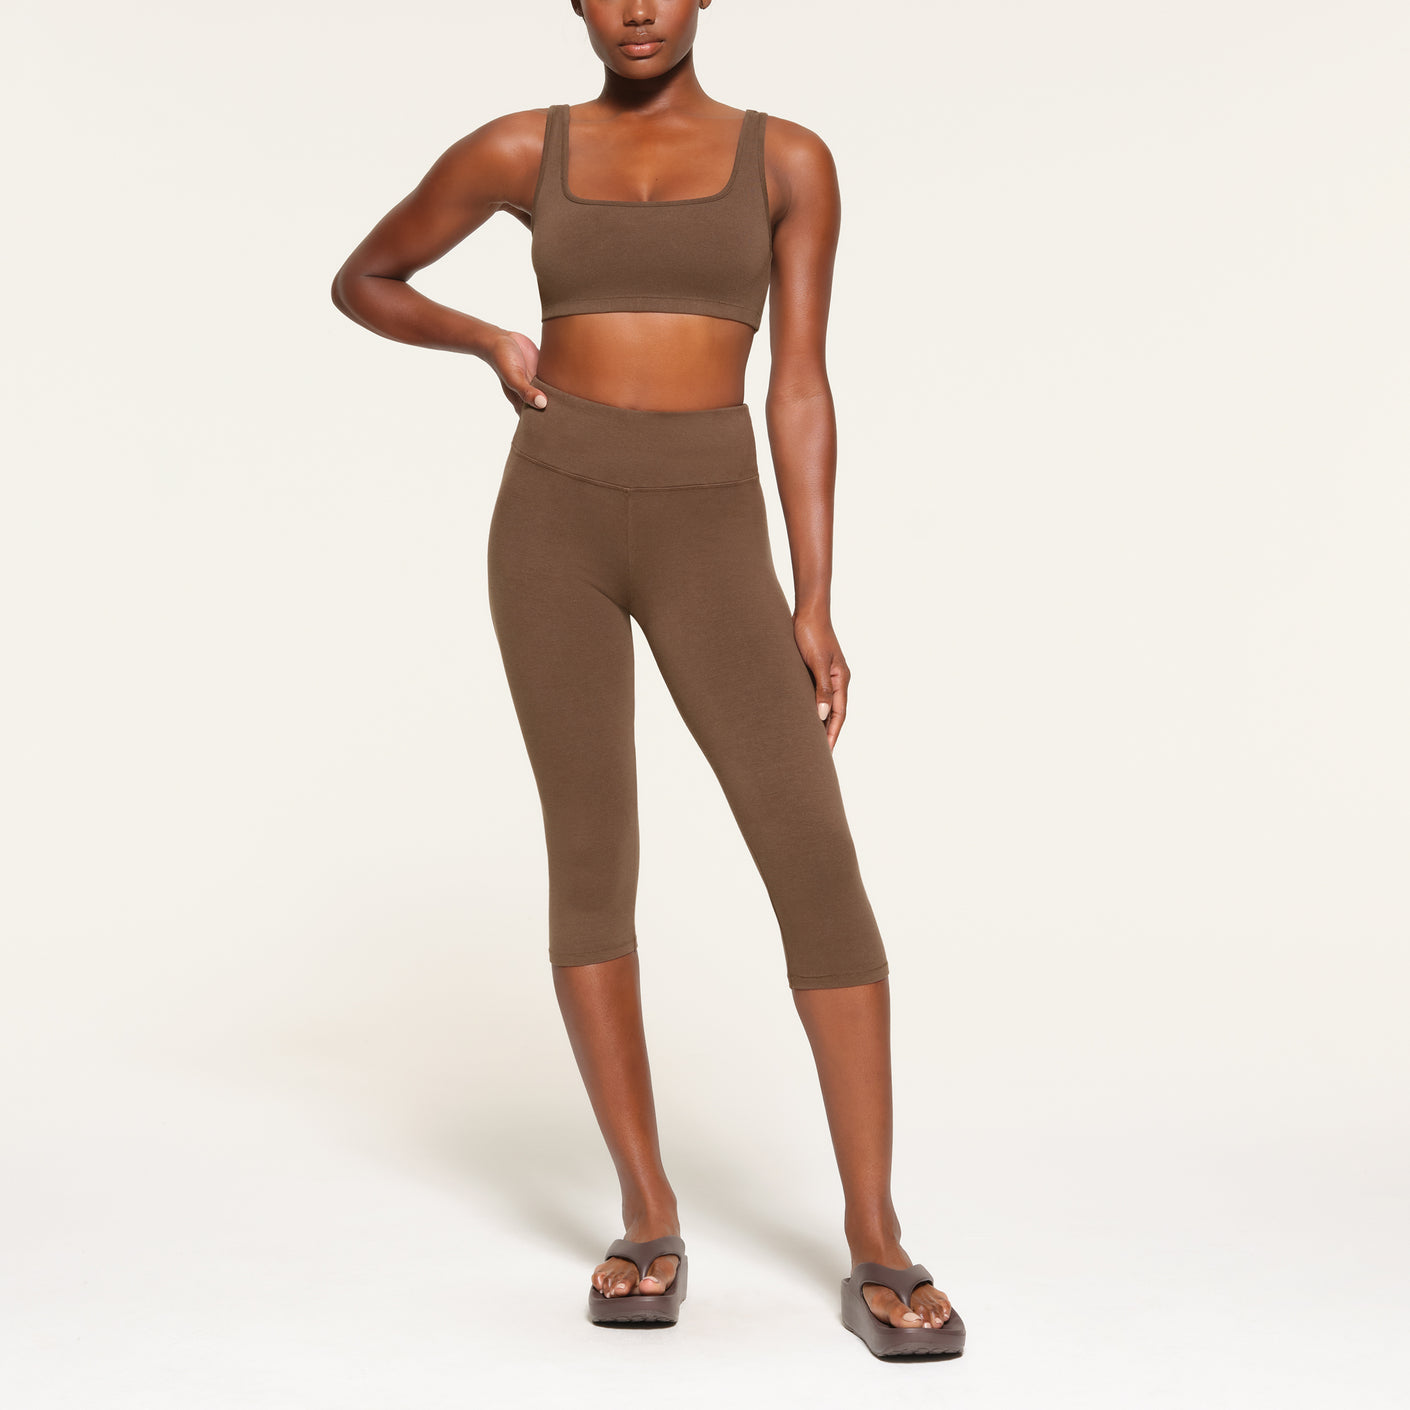 OUTDOOR CROPPED LEGGING